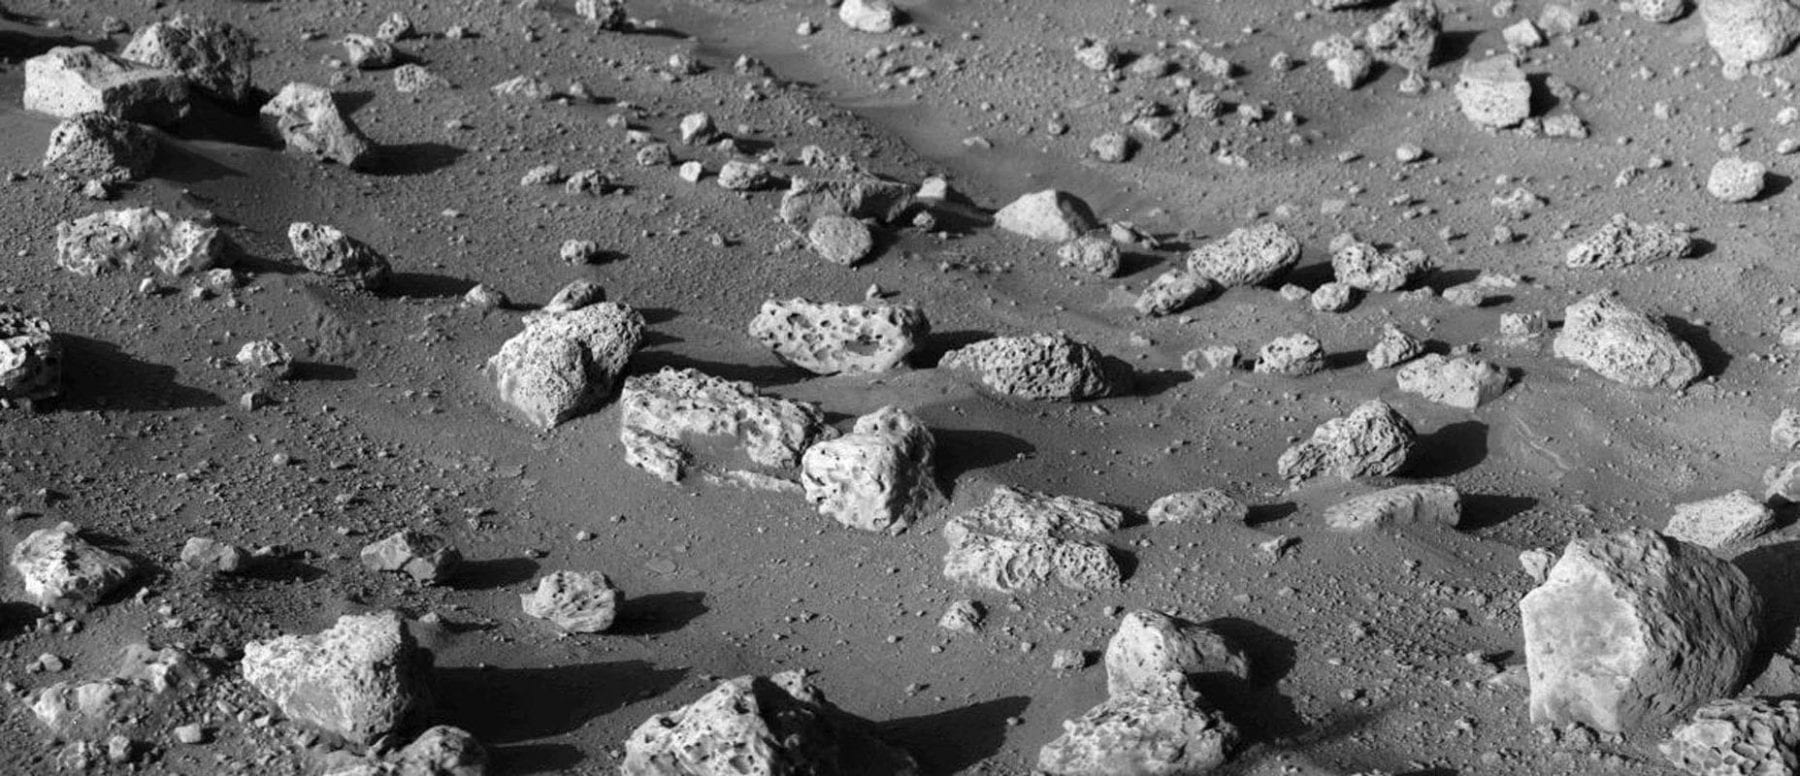 This image shows a few square meters of the surface that could have been (maybe were) used for sample collection. Credit: NASA/JPL